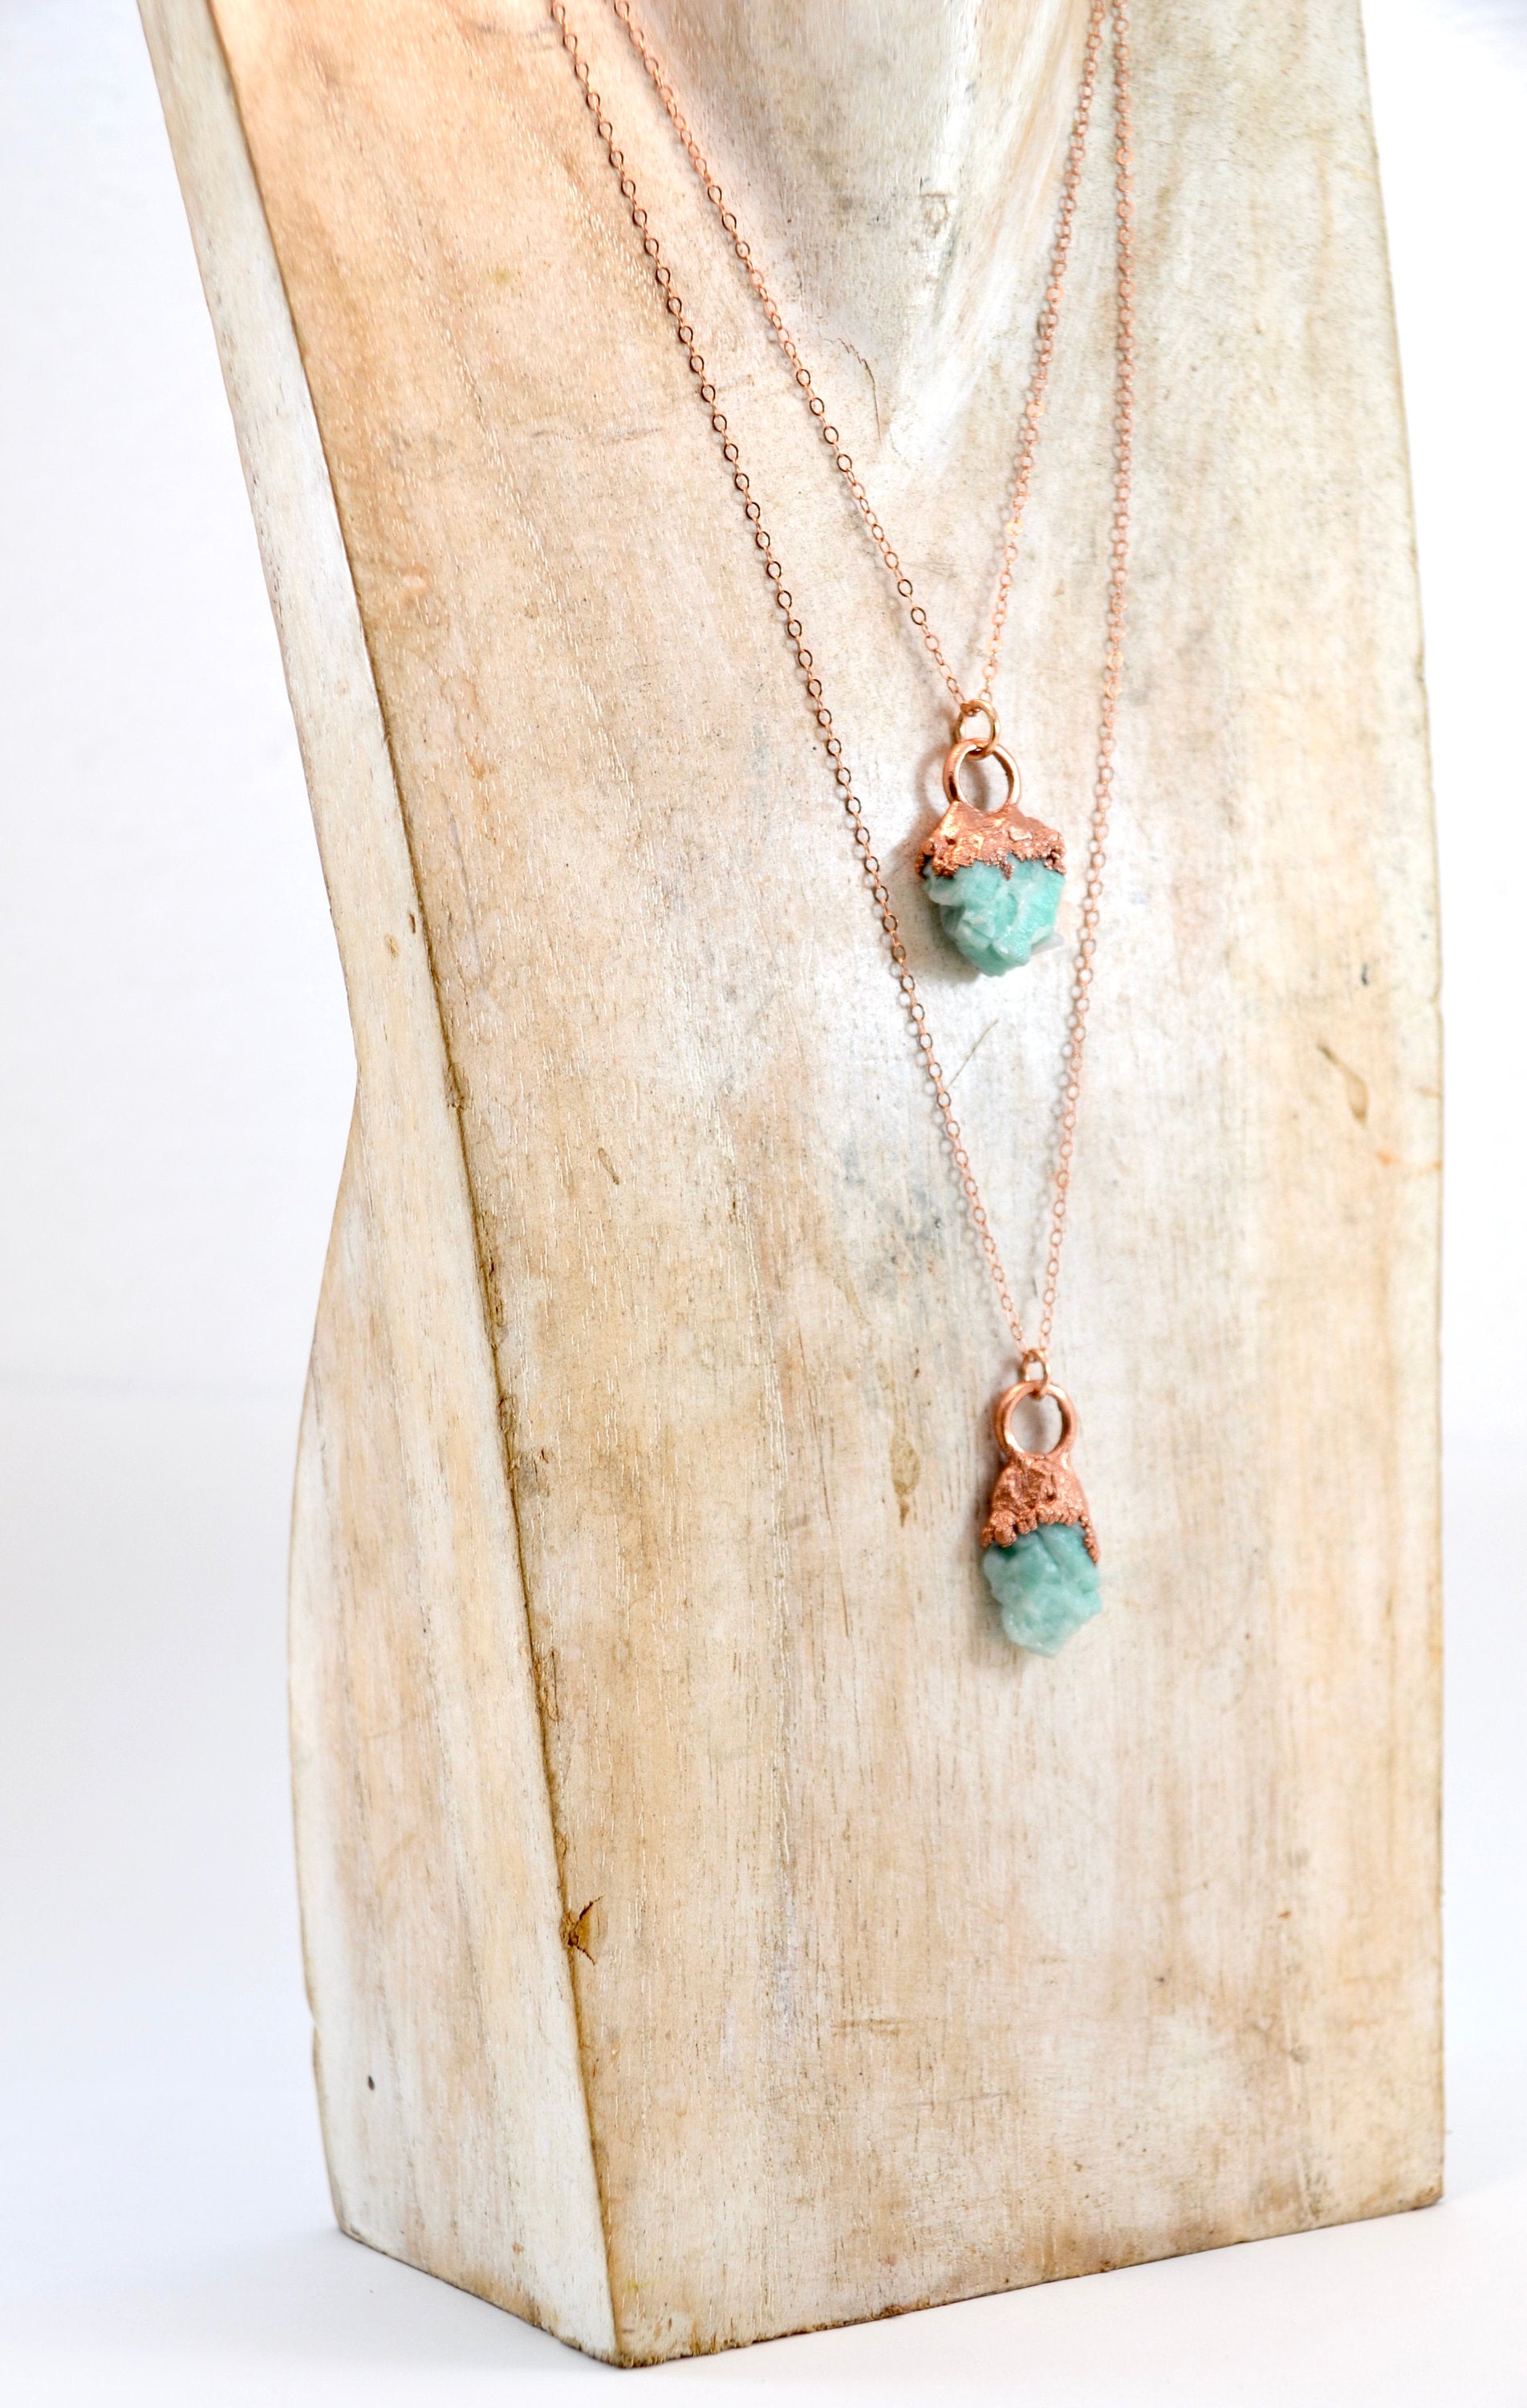 Copper Jewelry - Necklaces - Page 1 - Earth Angel Heals